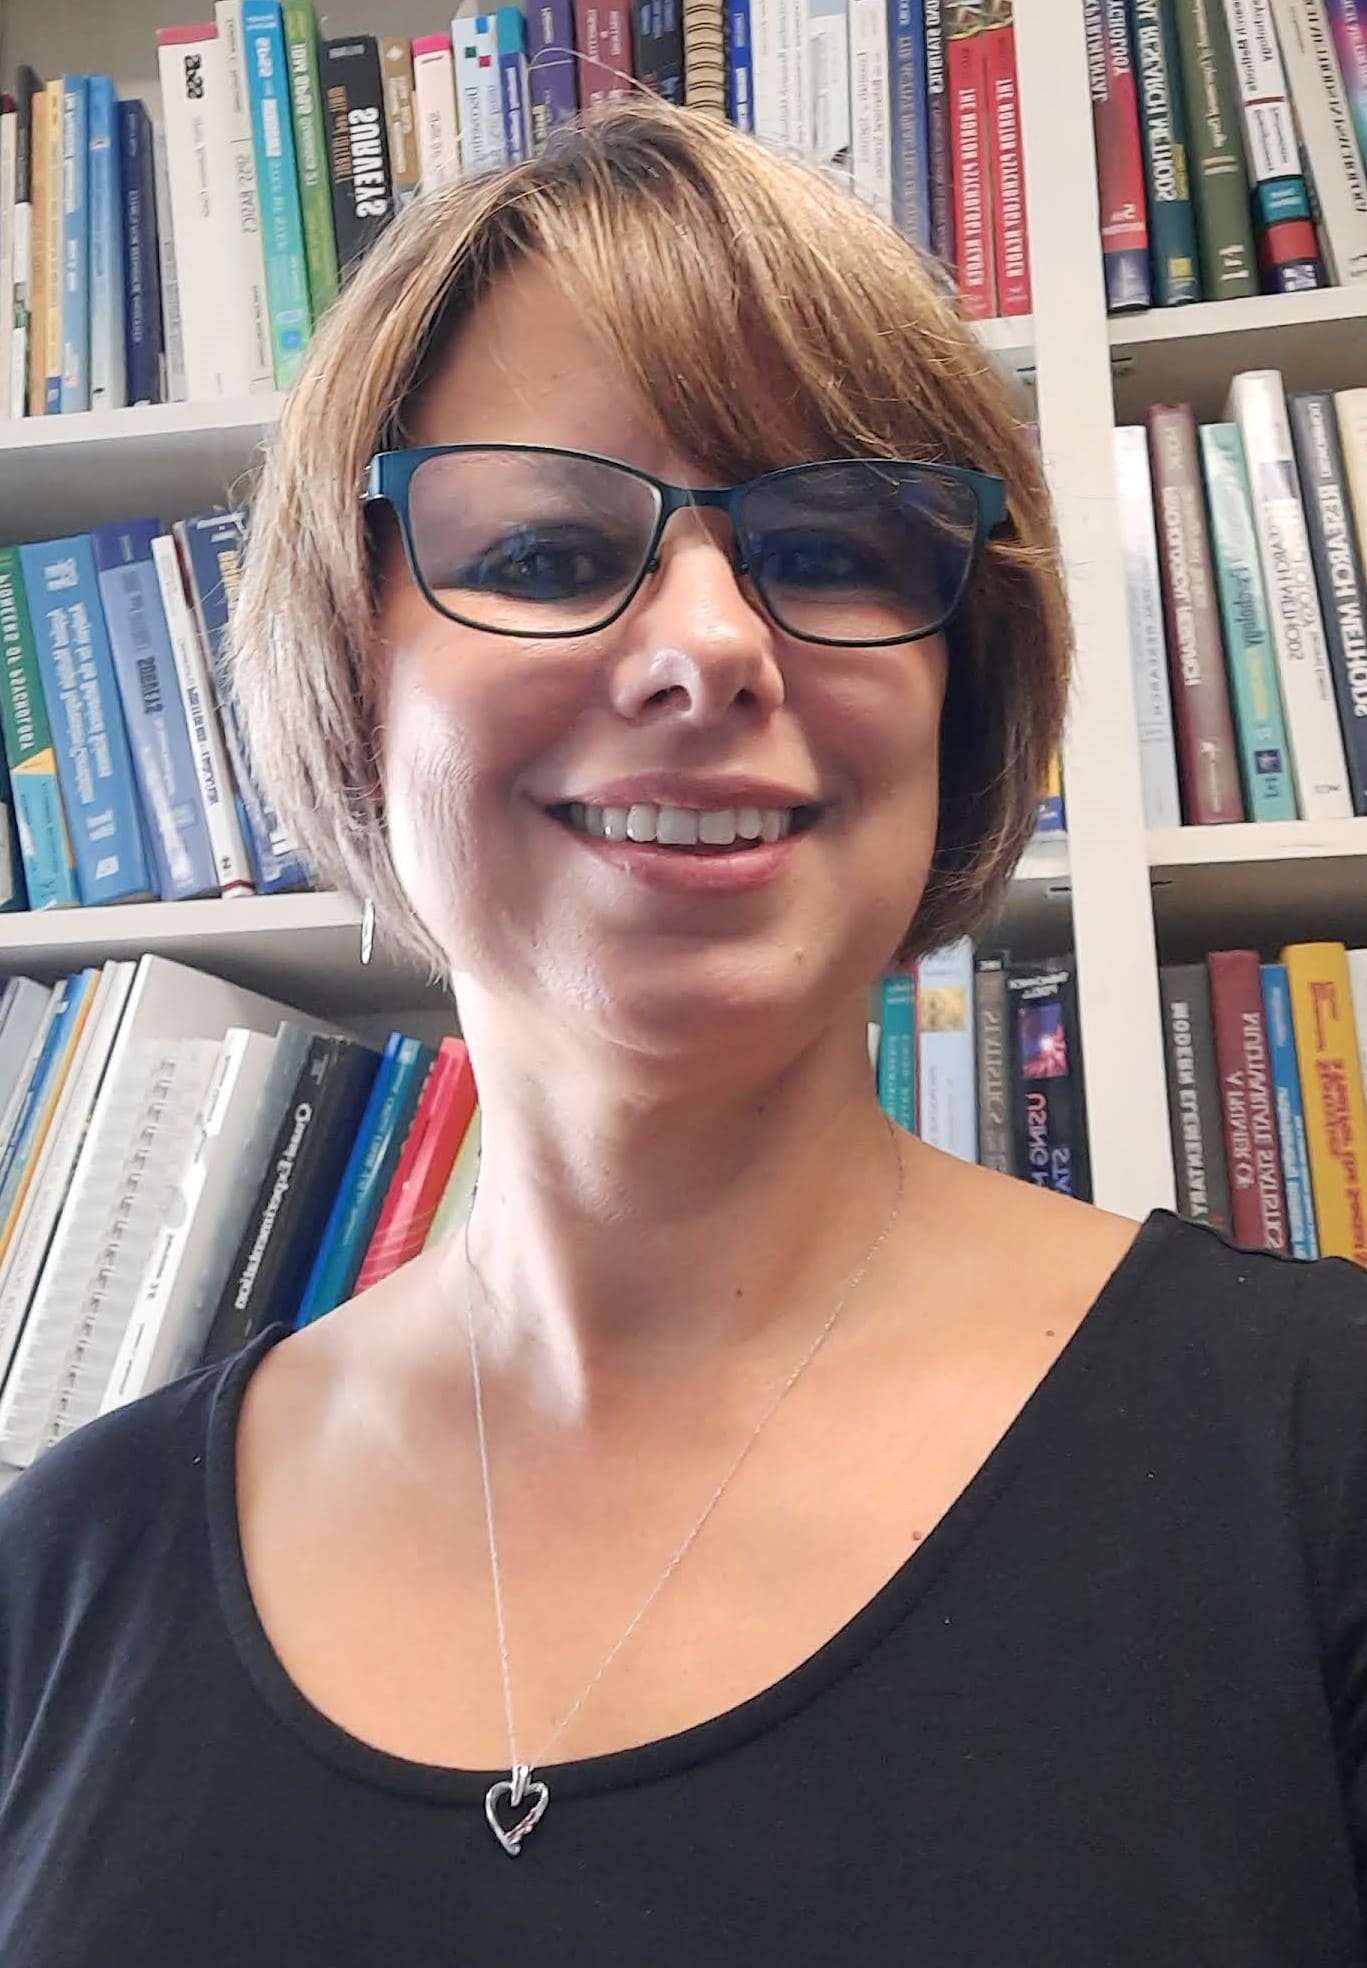 Woman in black shirt and short blonde hair with blue glasses, smiles at the camera with a bookcase in the background